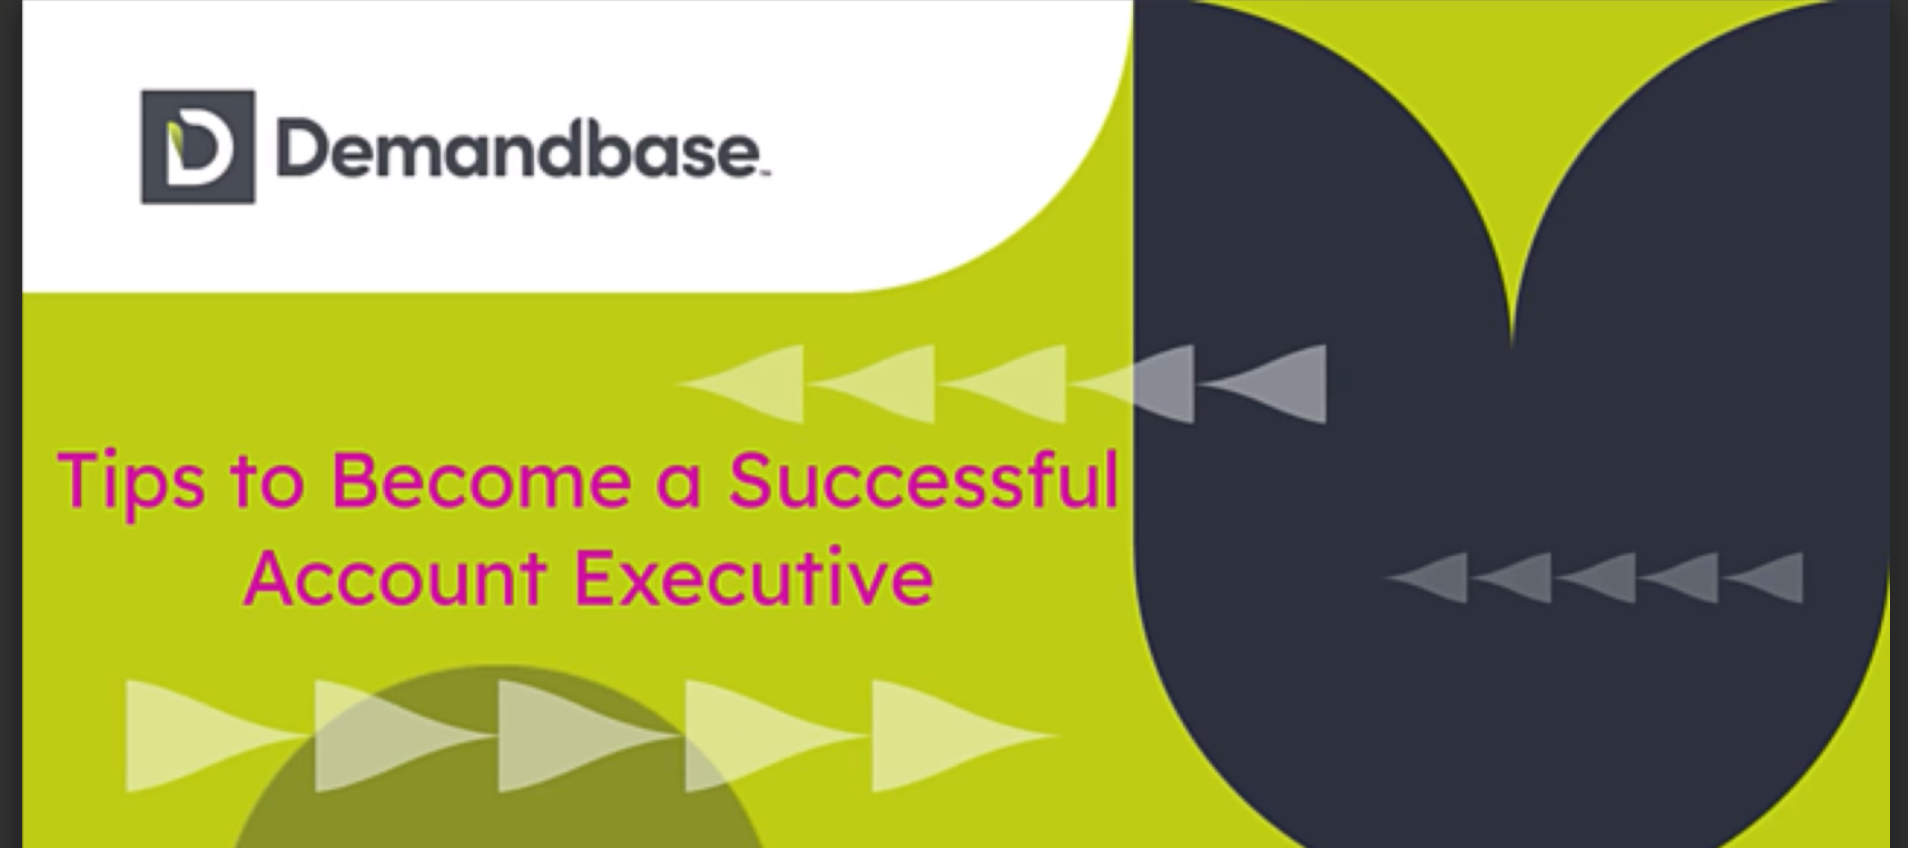 Tips for Using the ABX Platform from a Demandbase AE